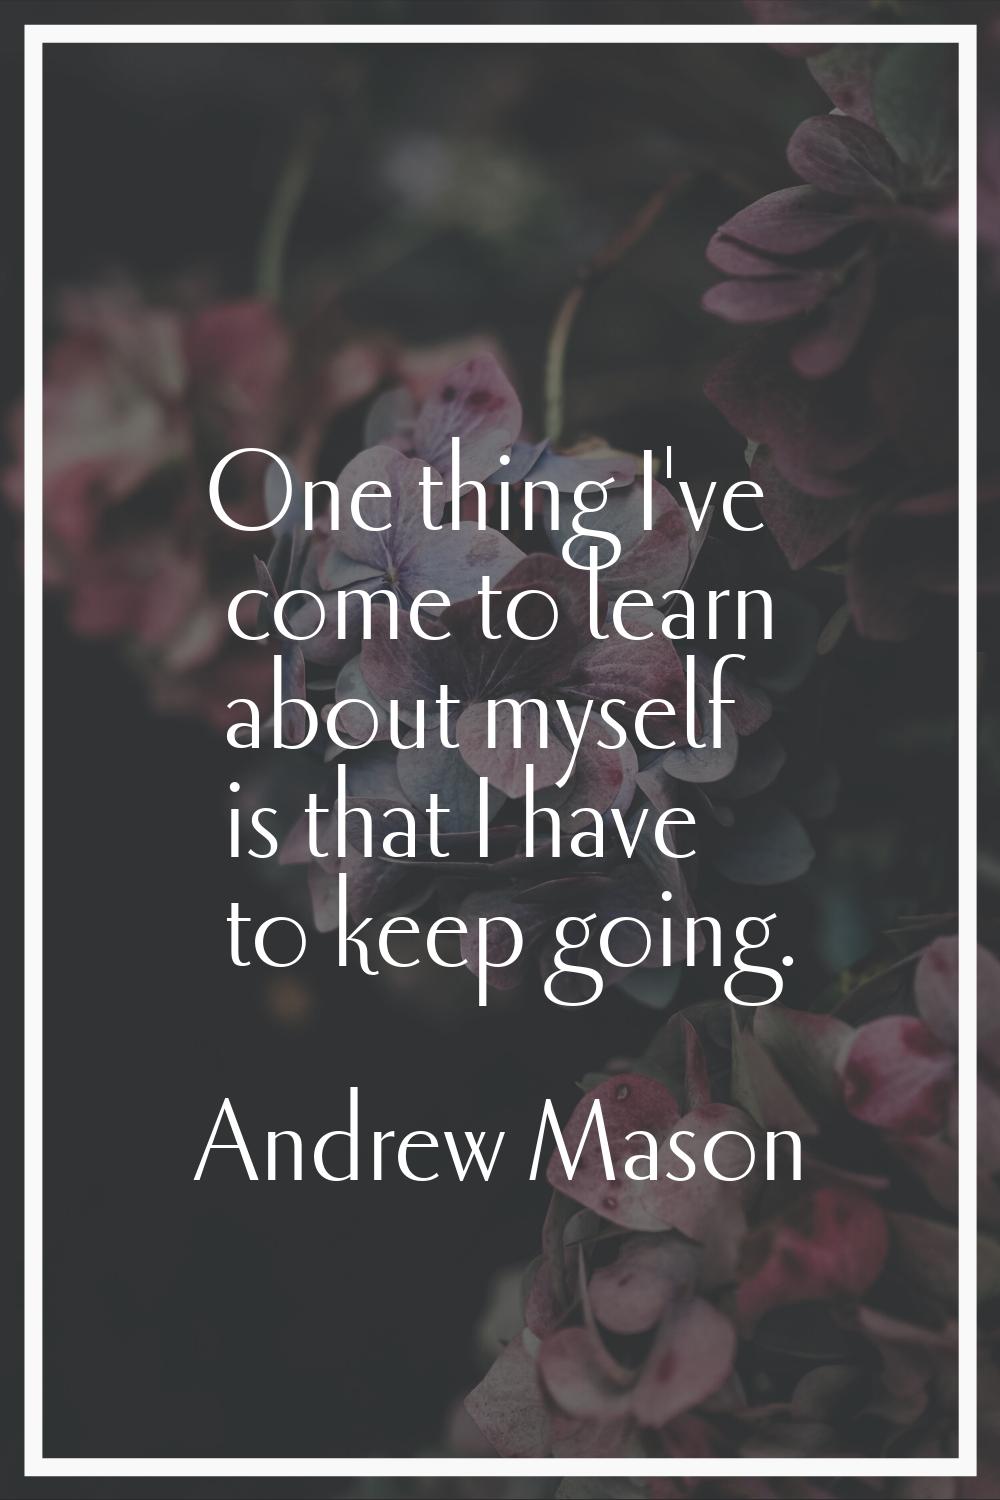 One thing I've come to learn about myself is that I have to keep going.